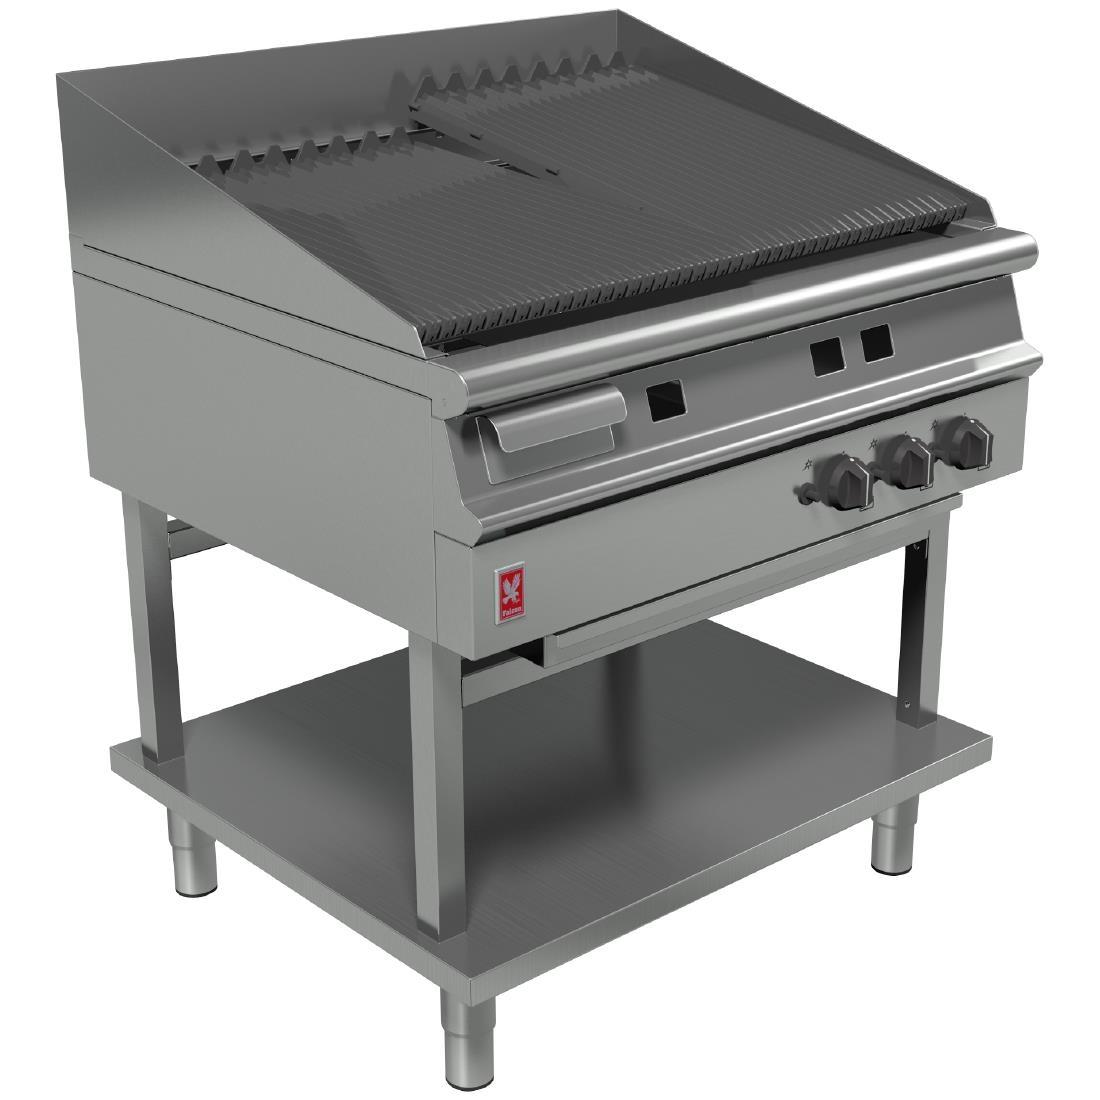 Falcon Dominator Plus LPG Chargrill On Fixed Stand G3925 - GP027-P  - 1